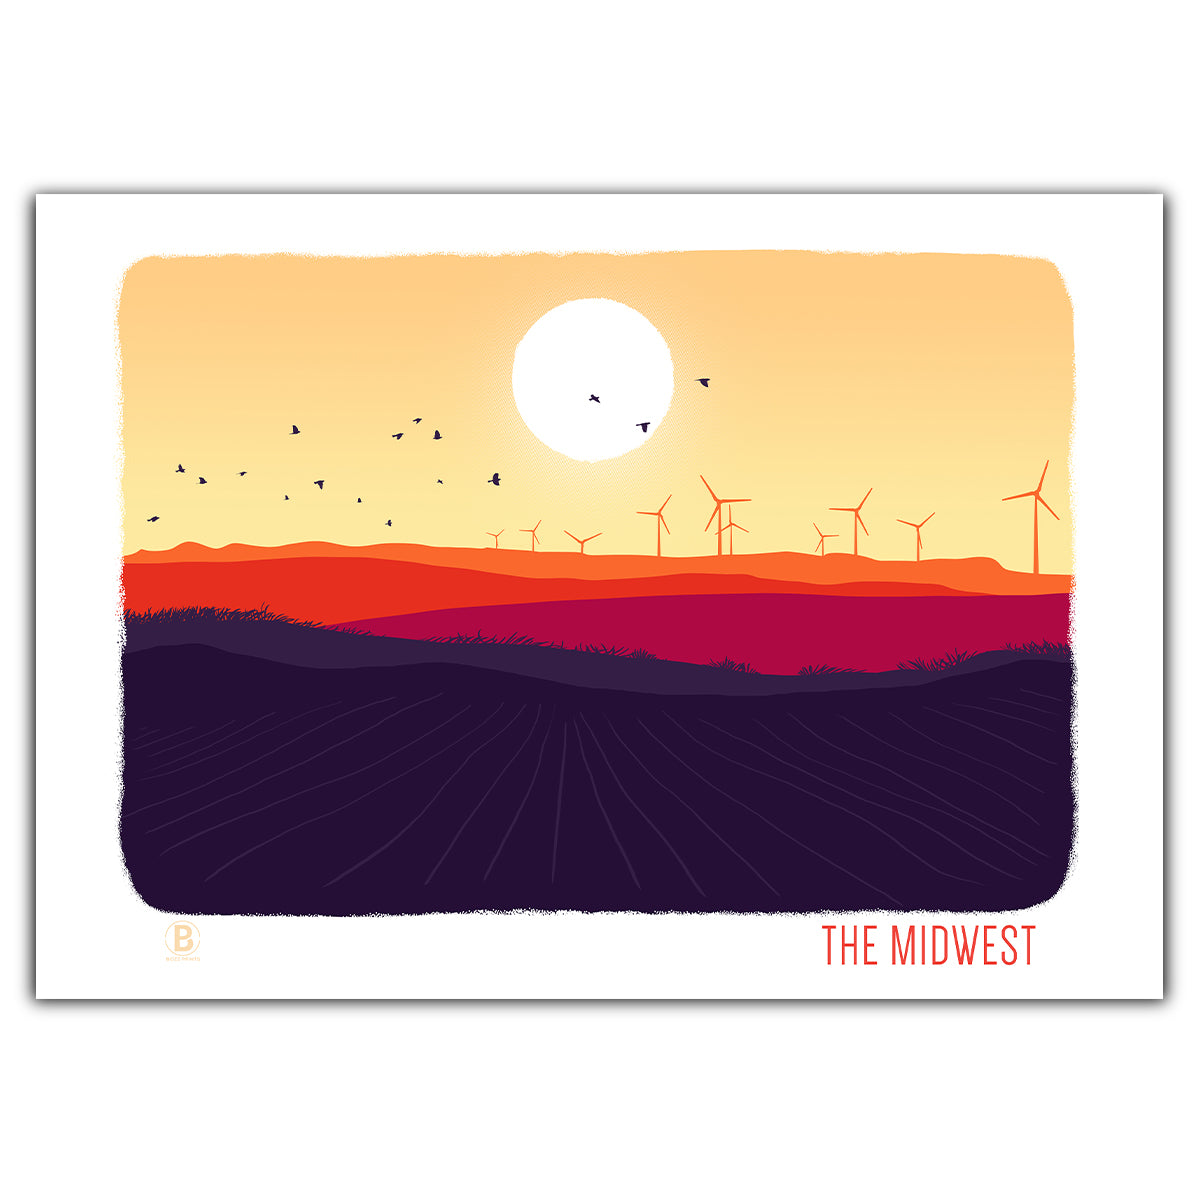 The Midwest Greeting Card - Bozz Prints